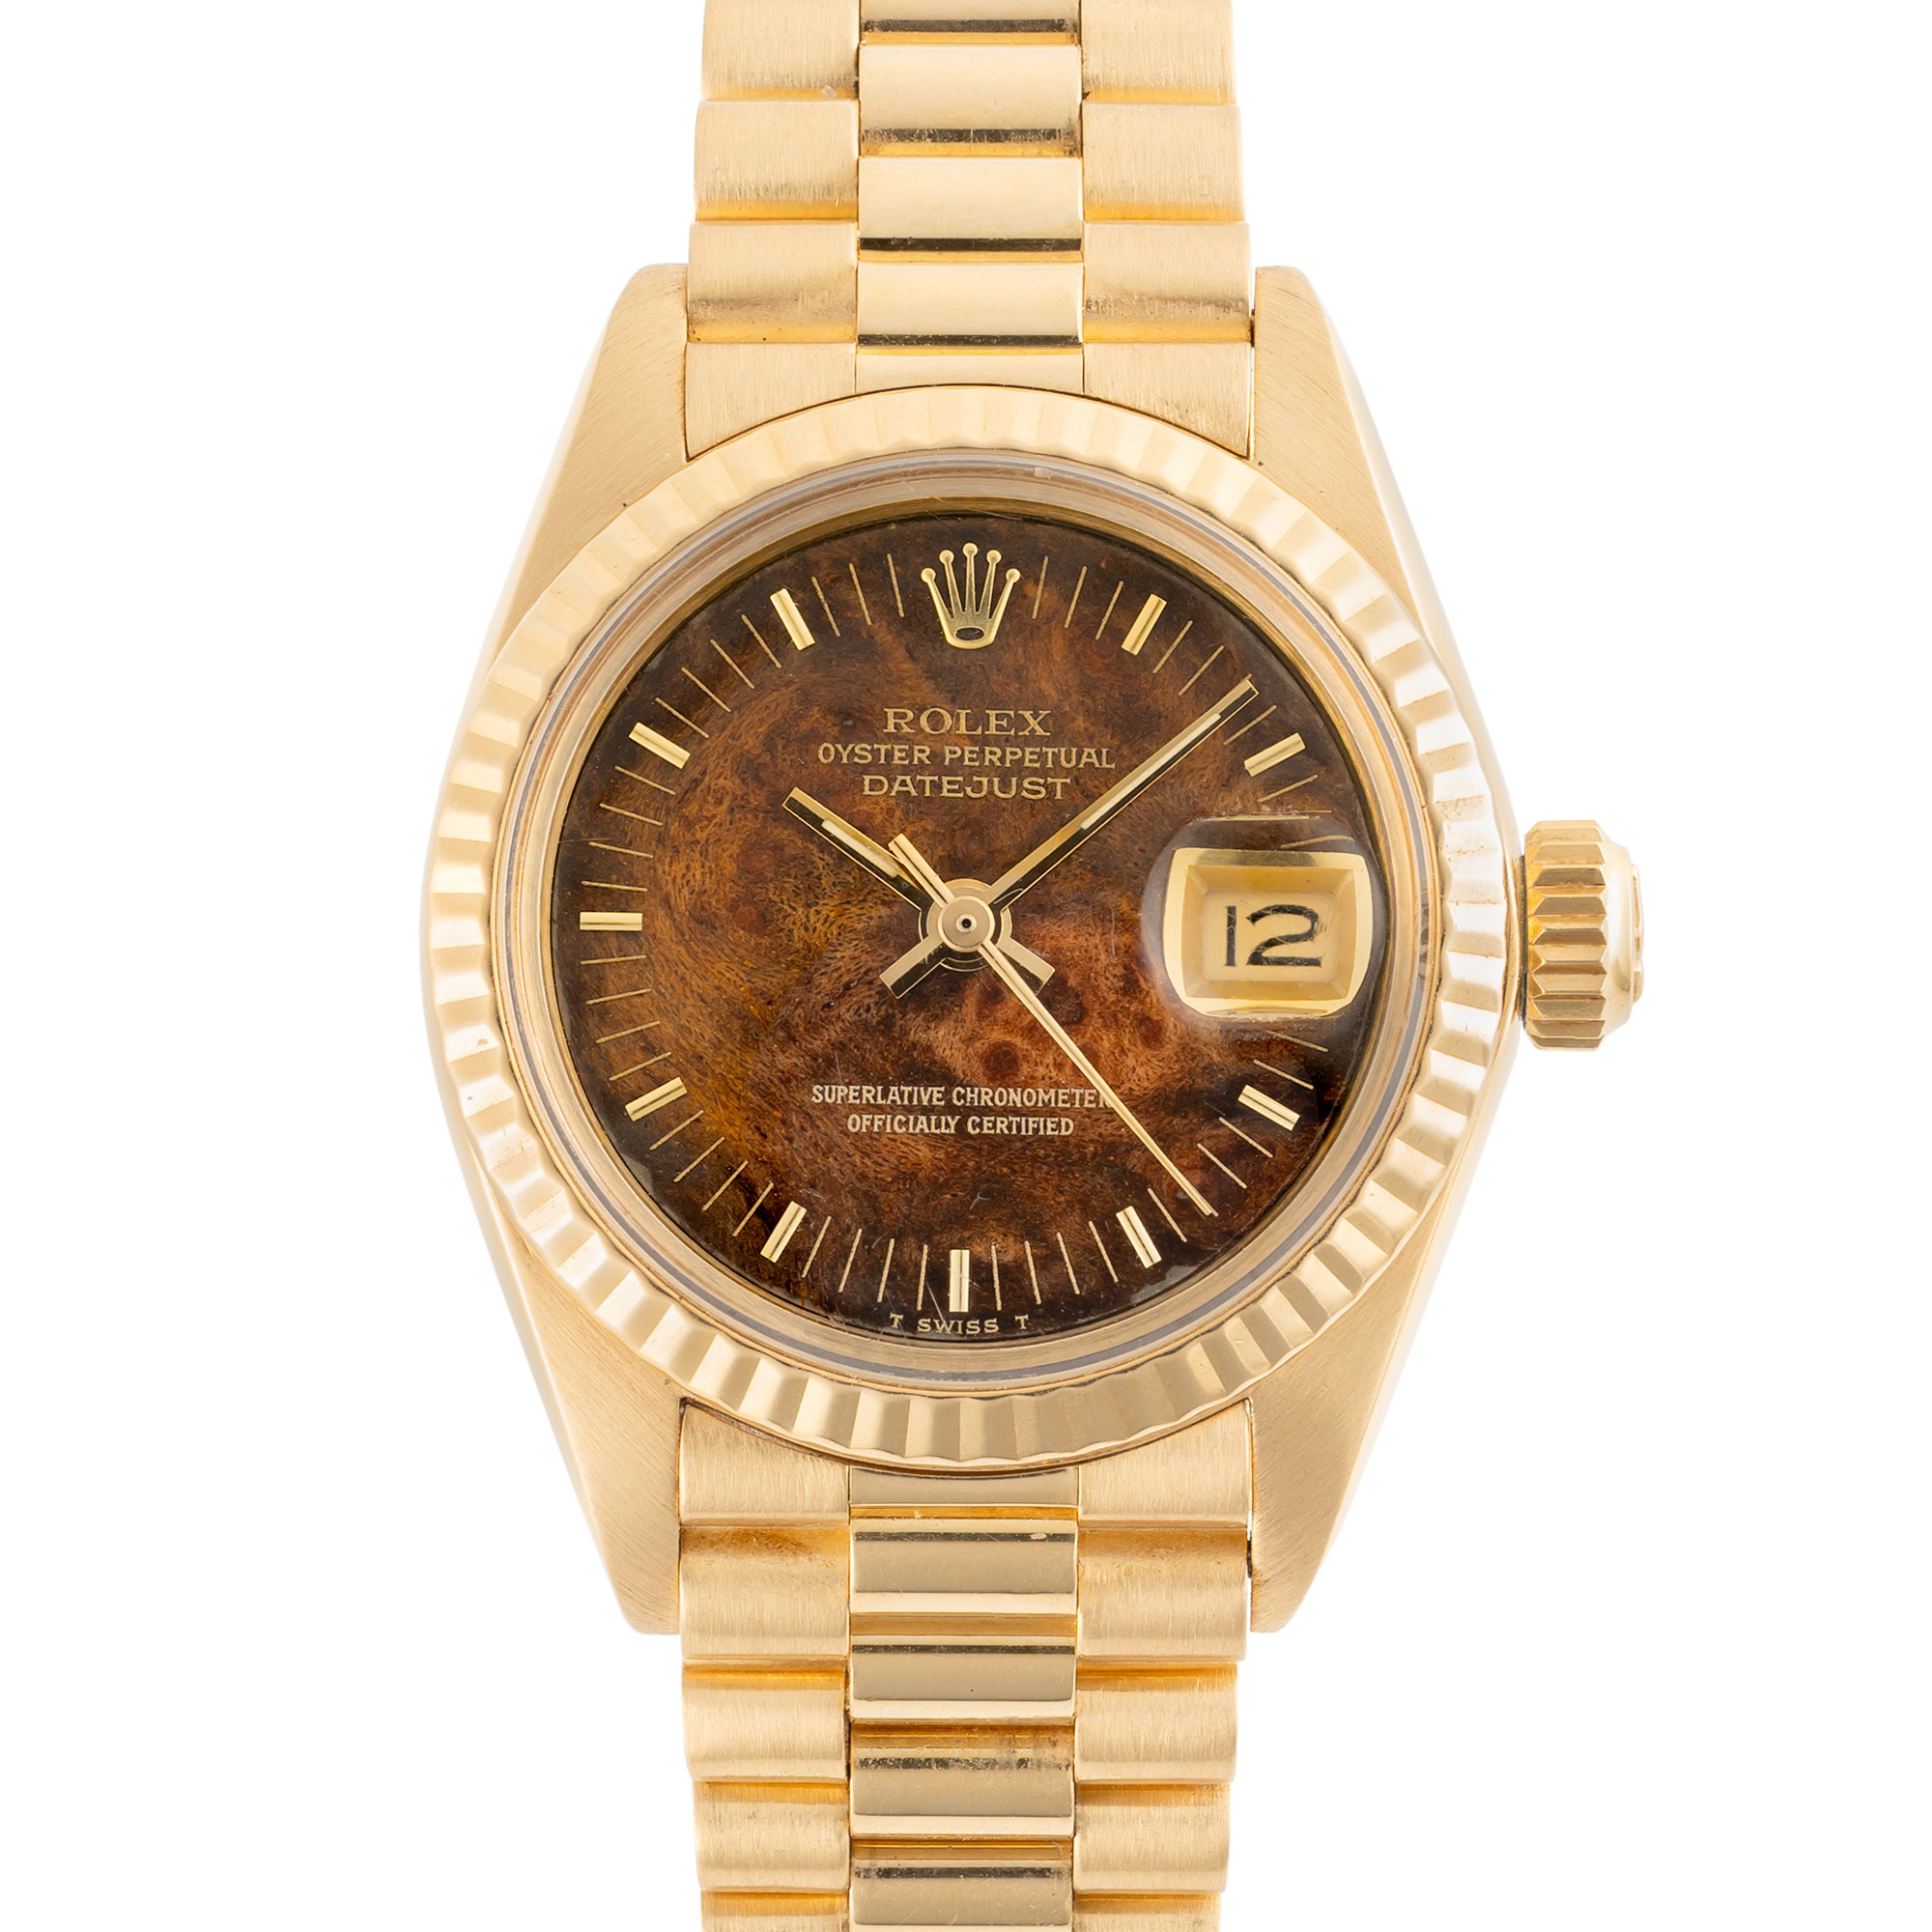 A LADY'S 18K SOLID GOLD ROLEX OYSTER PERPETUAL DATEJUST BRACELET WATCH CIRCA 1979, REF. 6917/8